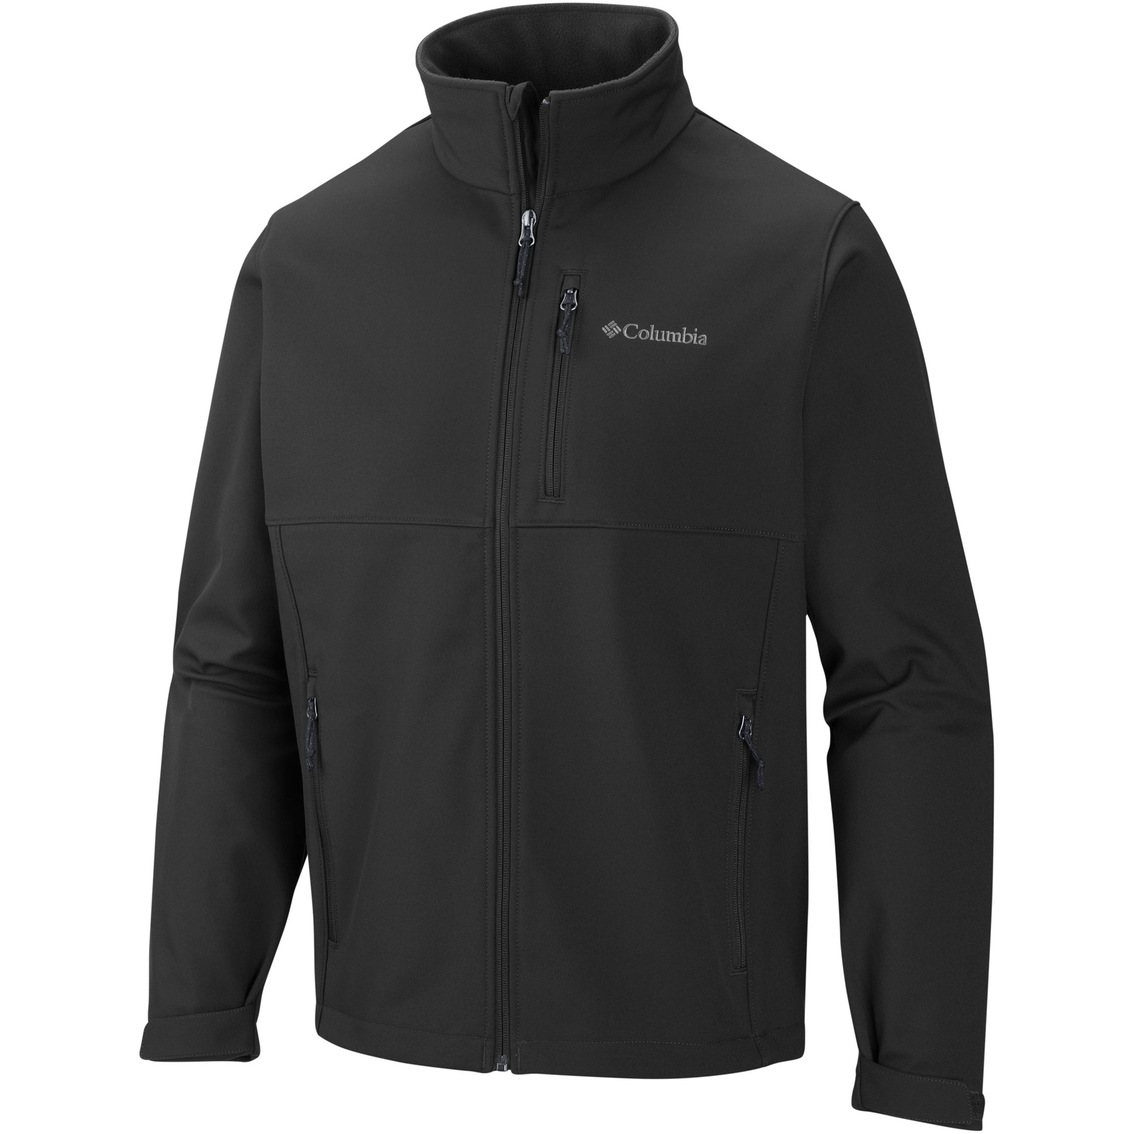 Columbia Ascender Softshell Jacket | Jackets | Clothing & Accessories ...